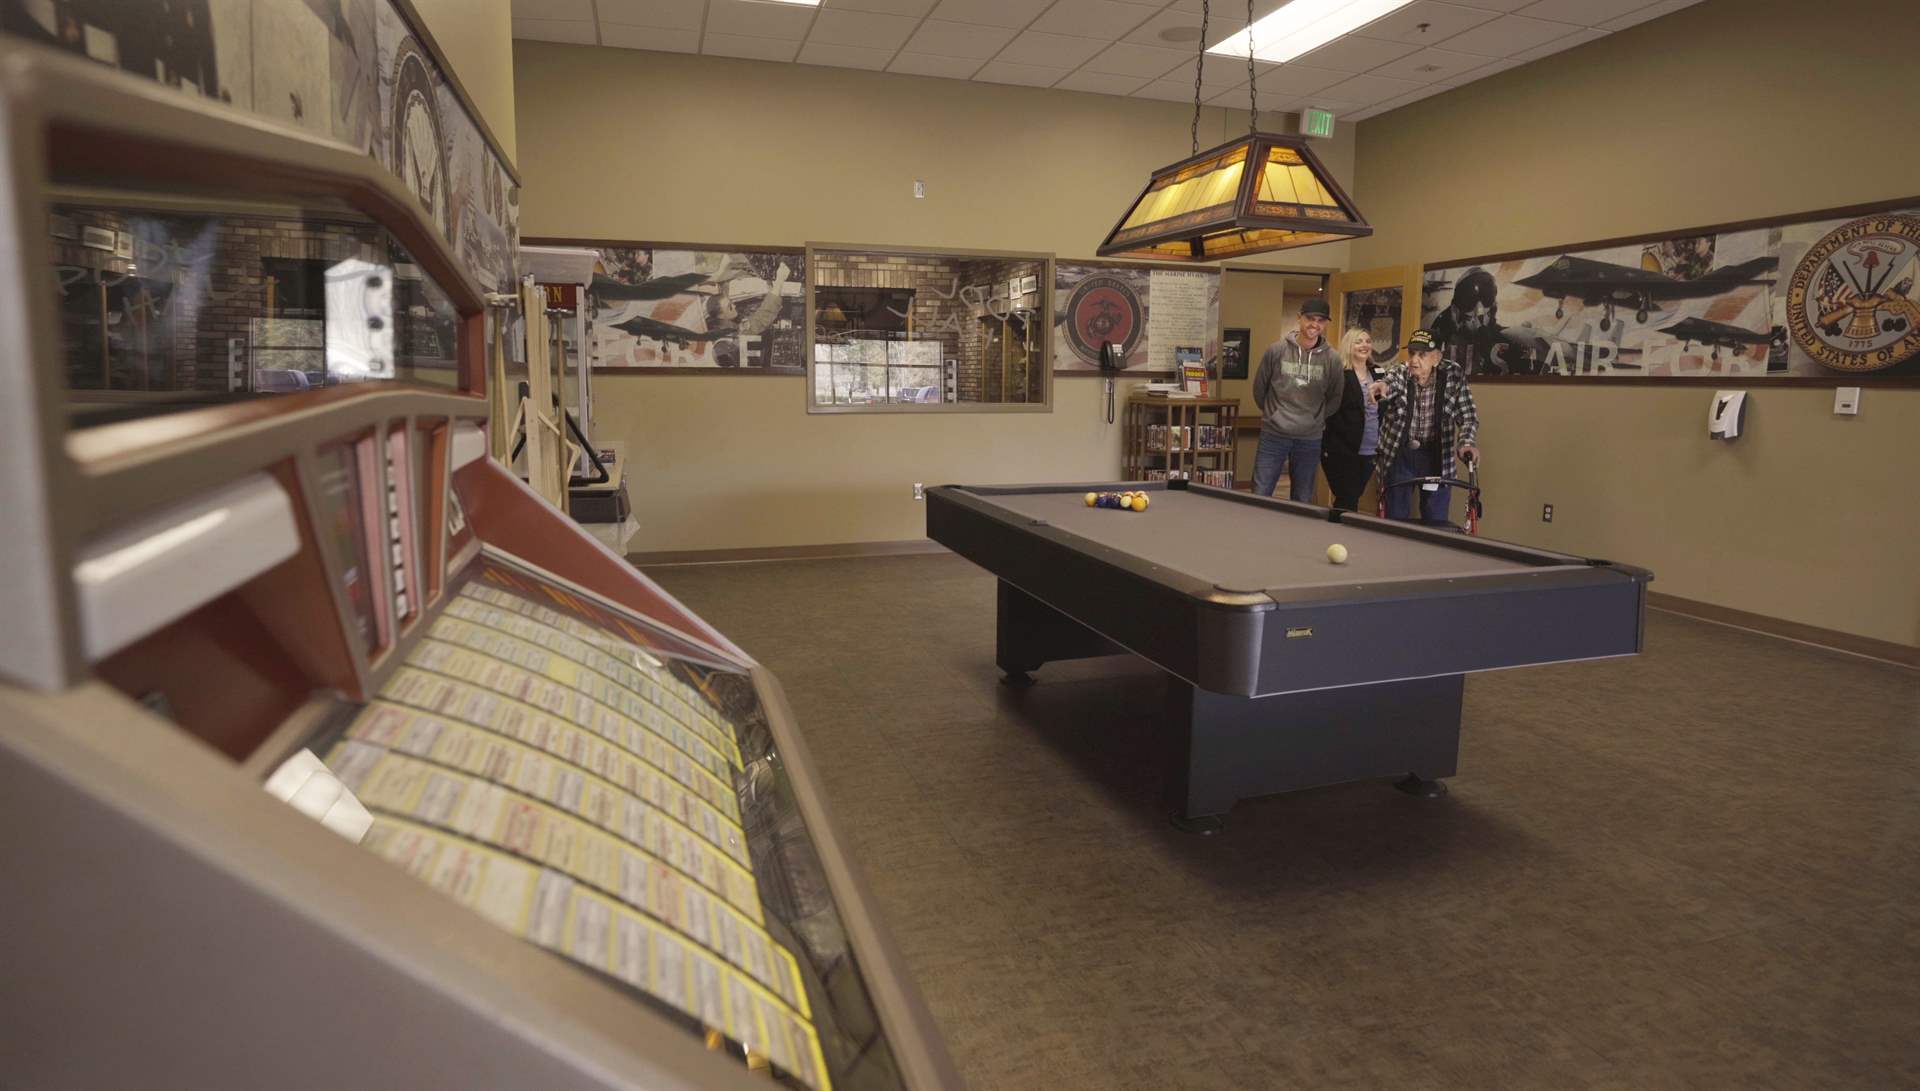 A potential resident and his family visiting the pool hall during a tour of the North Dakota Veterans Home.